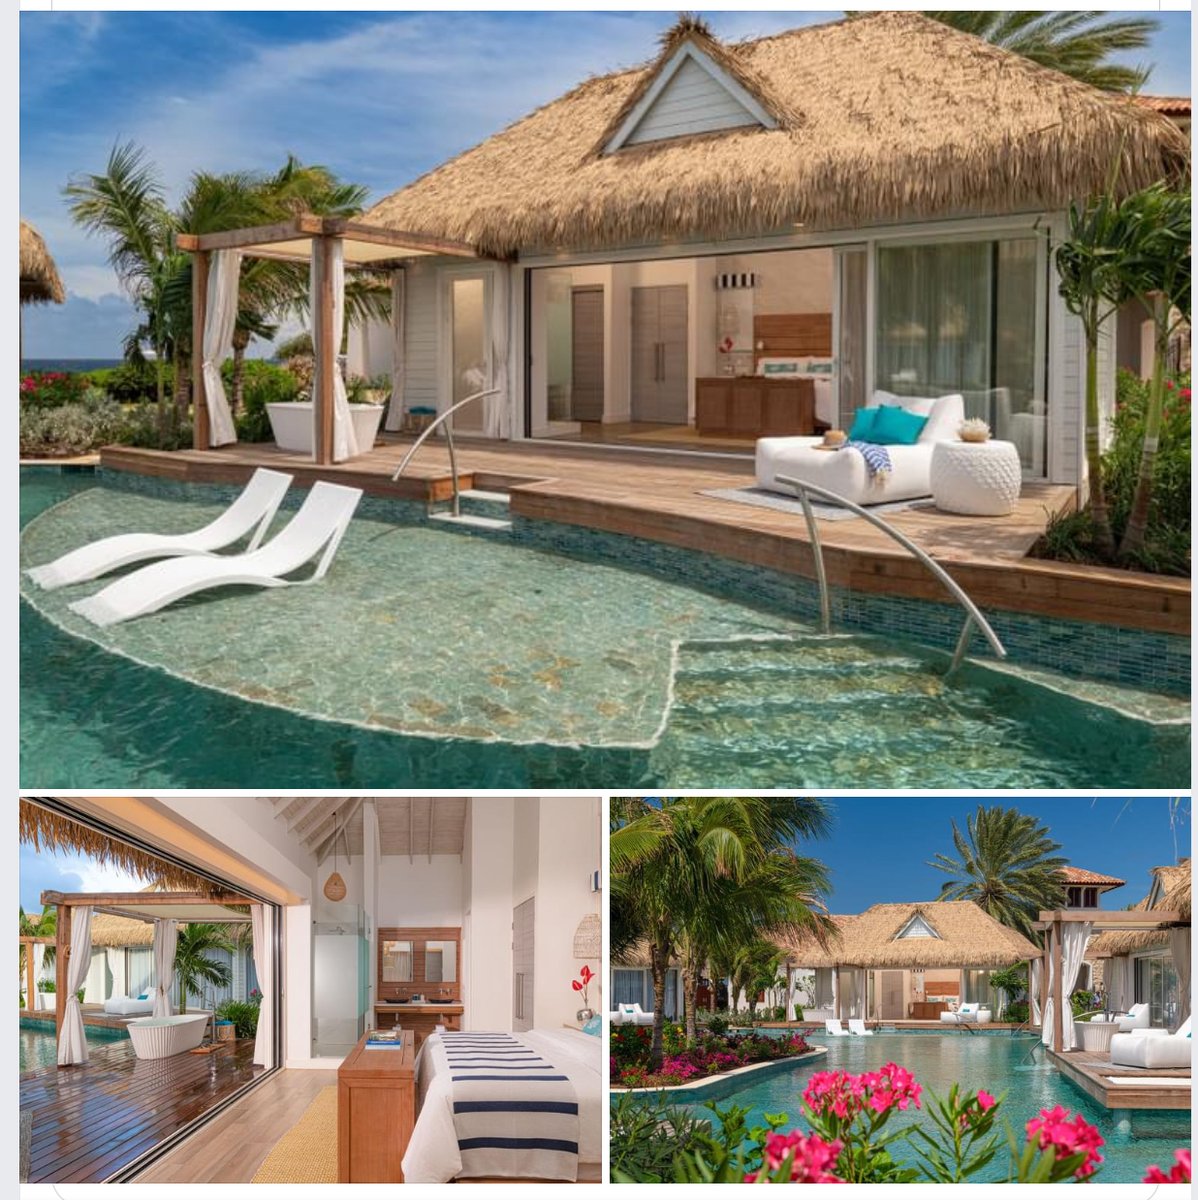 WOW, splurge a little- you deserve it! Sandals Royal Curacao in the KB- Kurason Island Poolside Butler Bungalow for 5 nights (arrive 10/27/24) for $10,036. What a retreat!! Must book by 5-14-24 for this deal so don't wait!
tinyurl.com/SCuracao

#Sandals #SandalsRoyalCuracao...